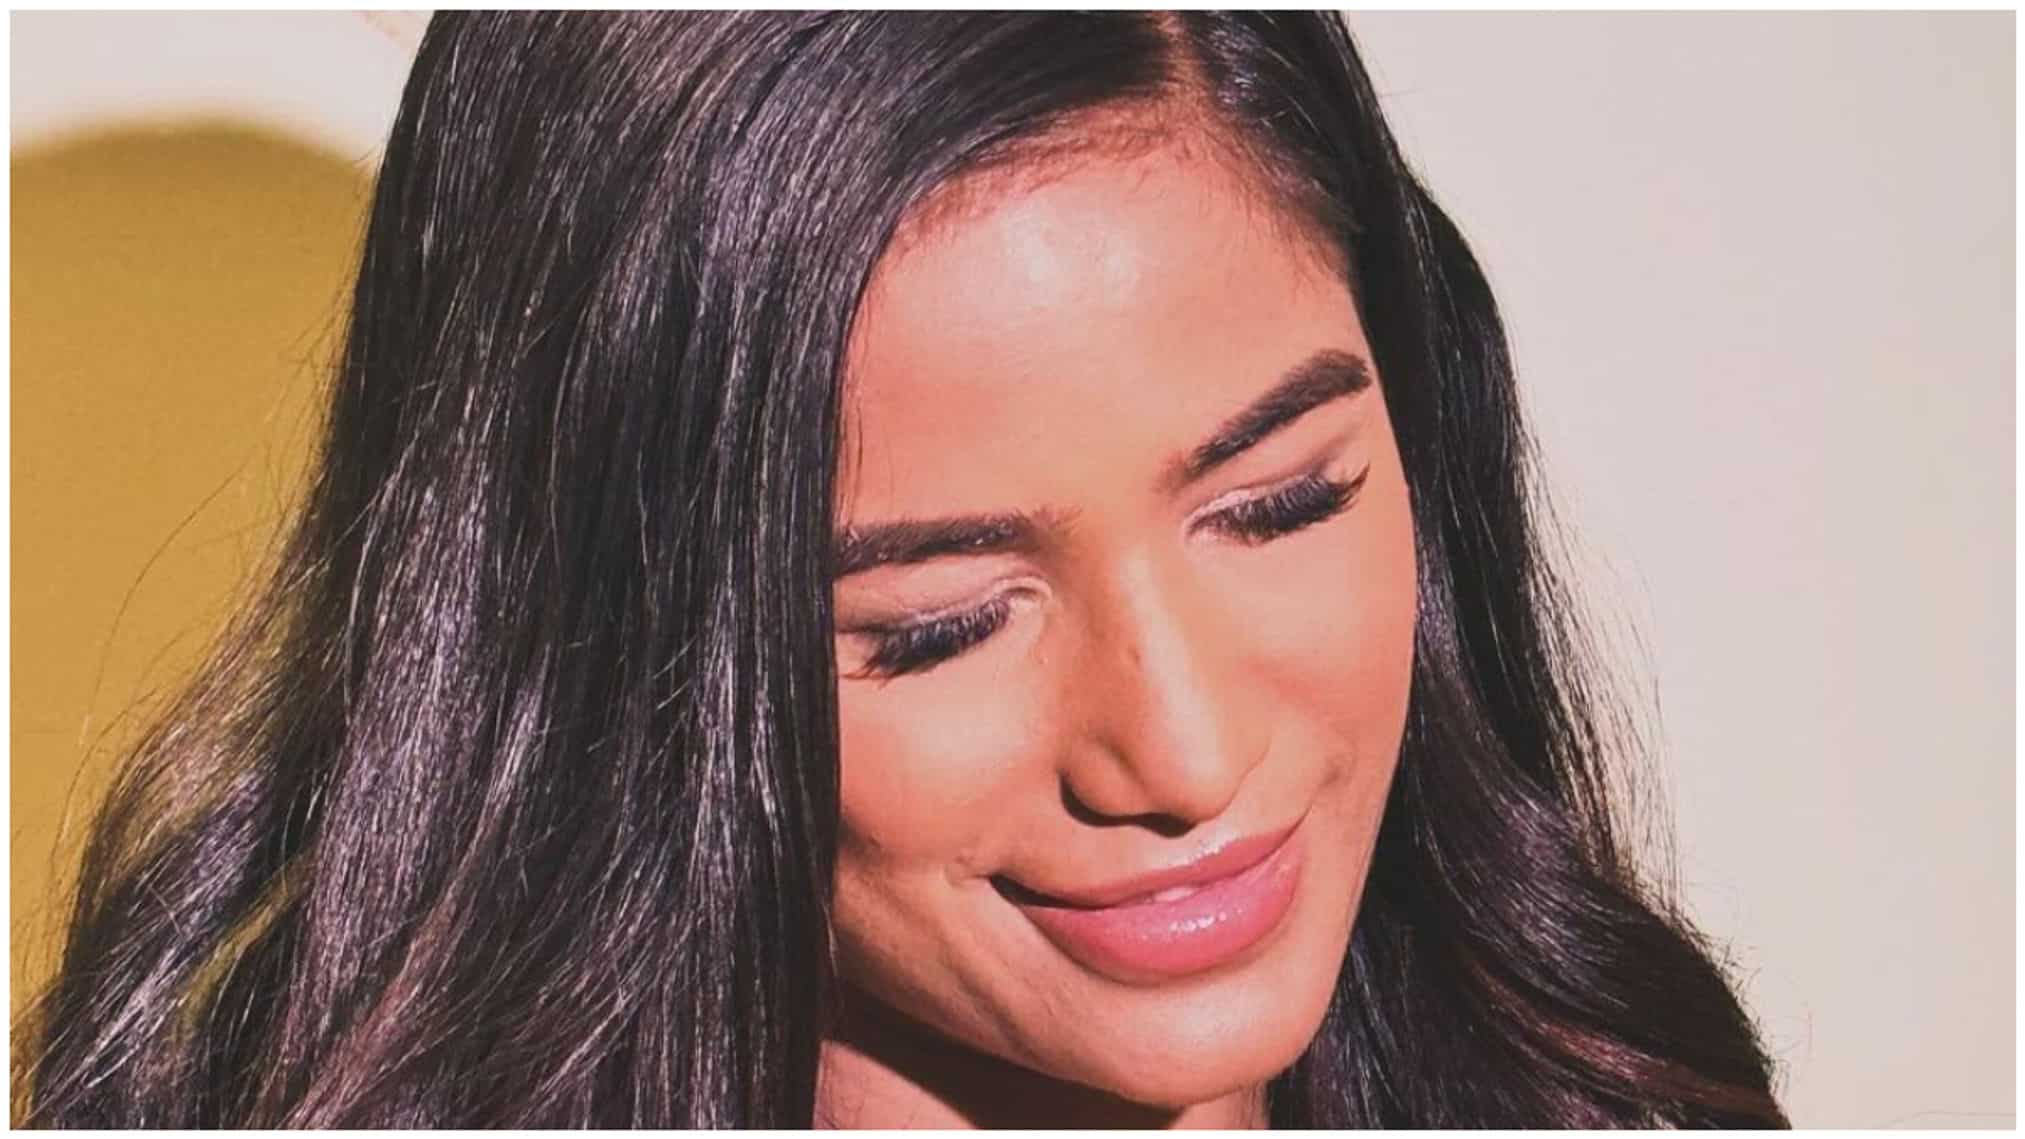 https://www.mobilemasala.com/film-gossip/Poonam-Pandey-Death-News-Watch-her-viral-video-in-which-she-says-Very-big-news-is-about-to-come-i211639